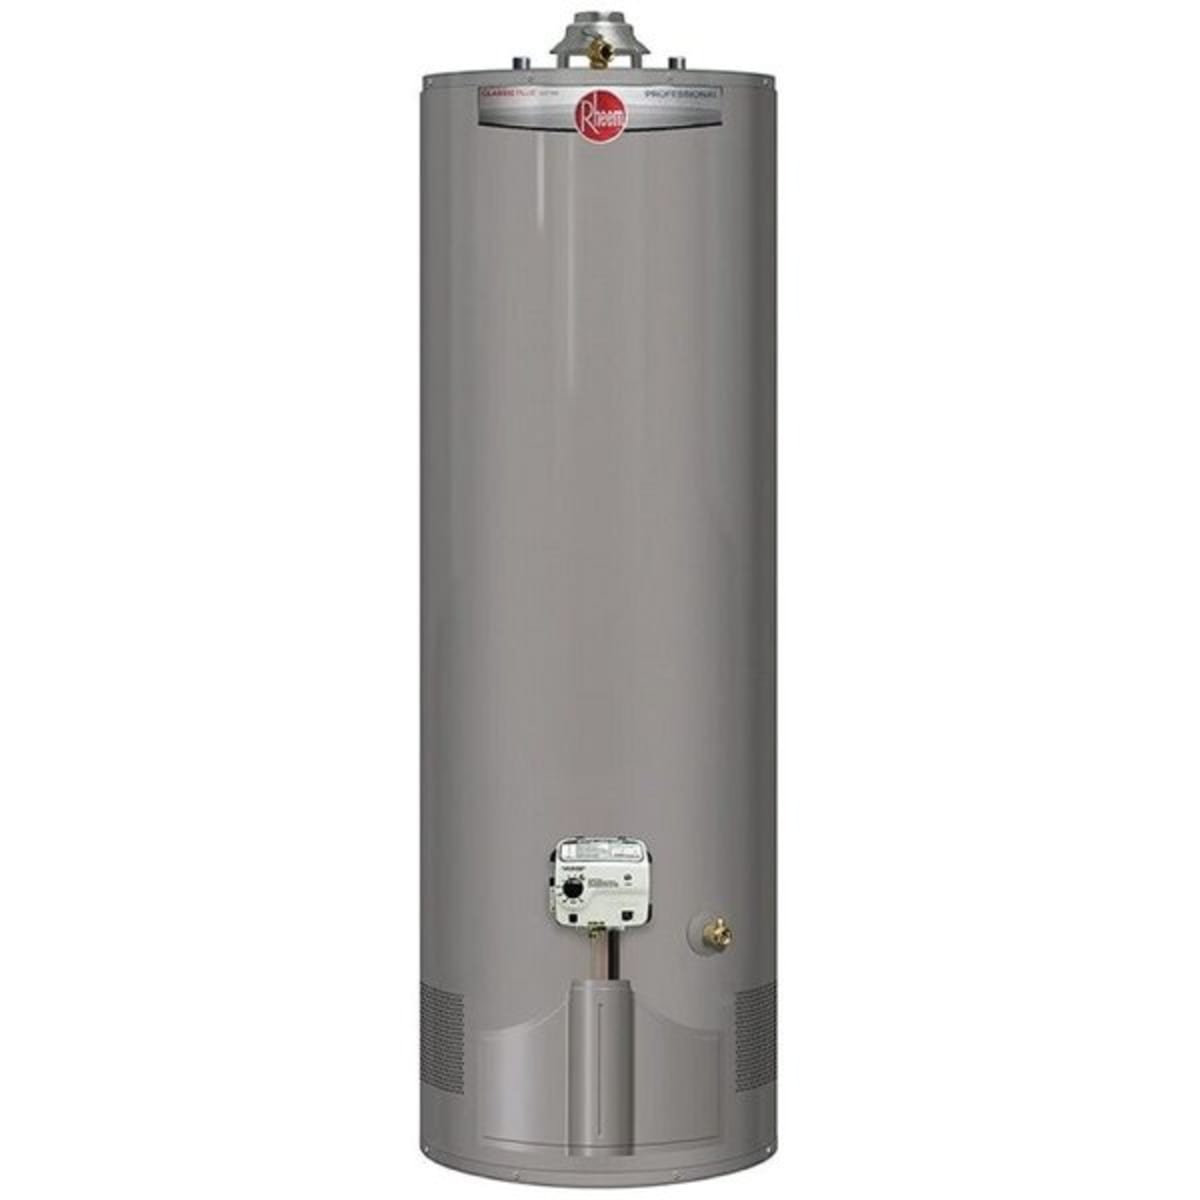 Rheem Commercial Point of Use 10 gal. 120-Volt 2kW 1 Phase Electric Tank Water Heater